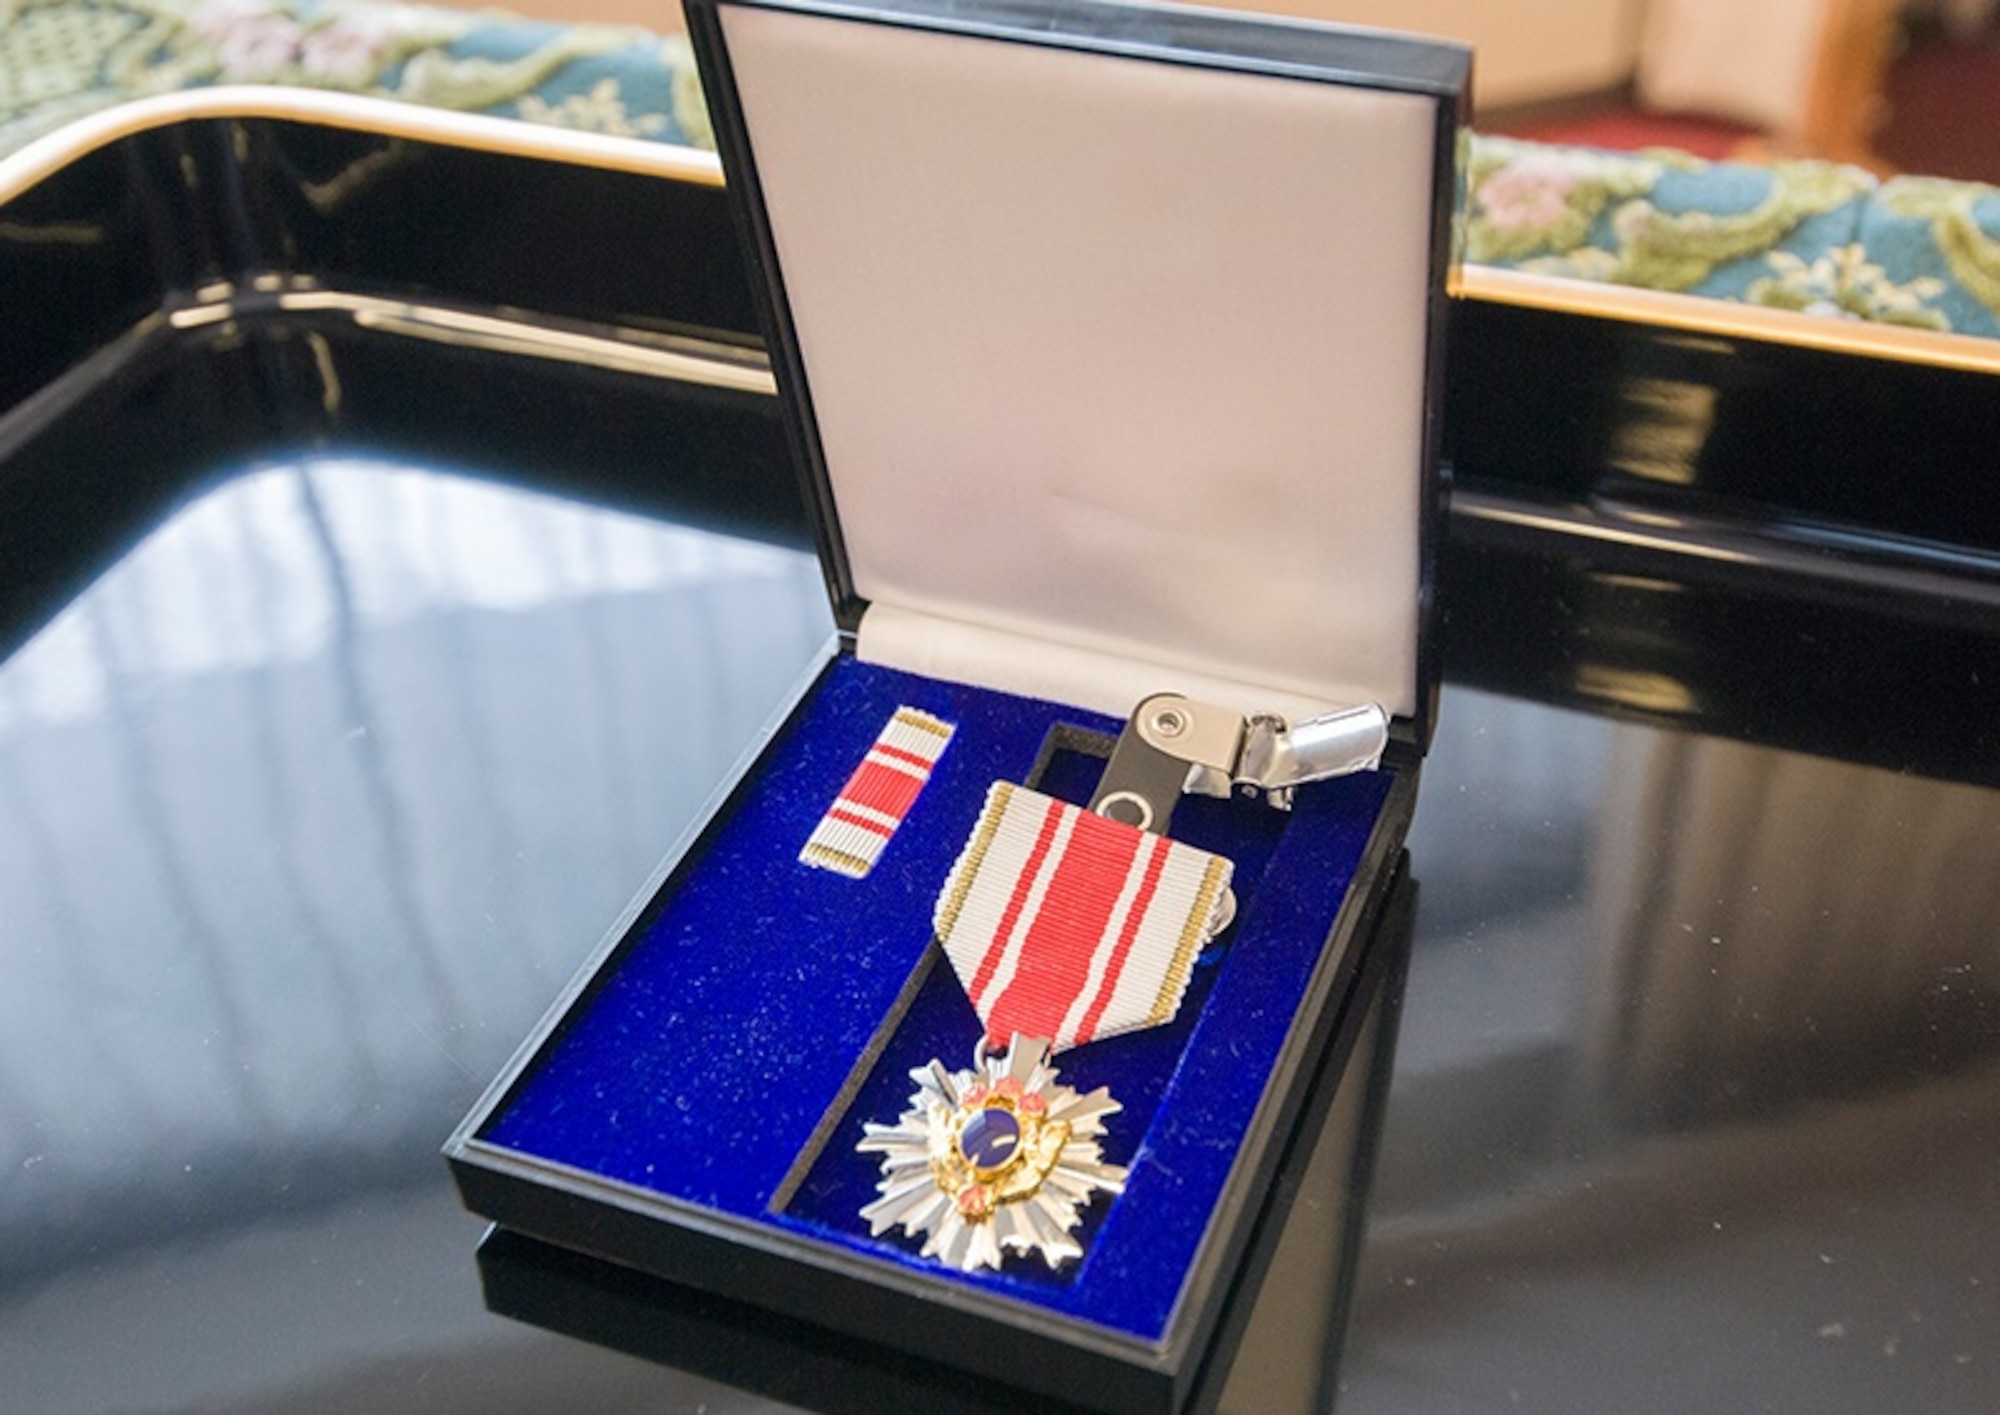 The Defense Cooperation Award (Second Class) is presented to members of foreign armed forces who distinguished themselves by their most notable achievement or service rendered in contribution to defense cooperation between Japan and their countries. This is the highest medal Japan awards to members of a foreign military. (Photo courtesy JASDF)